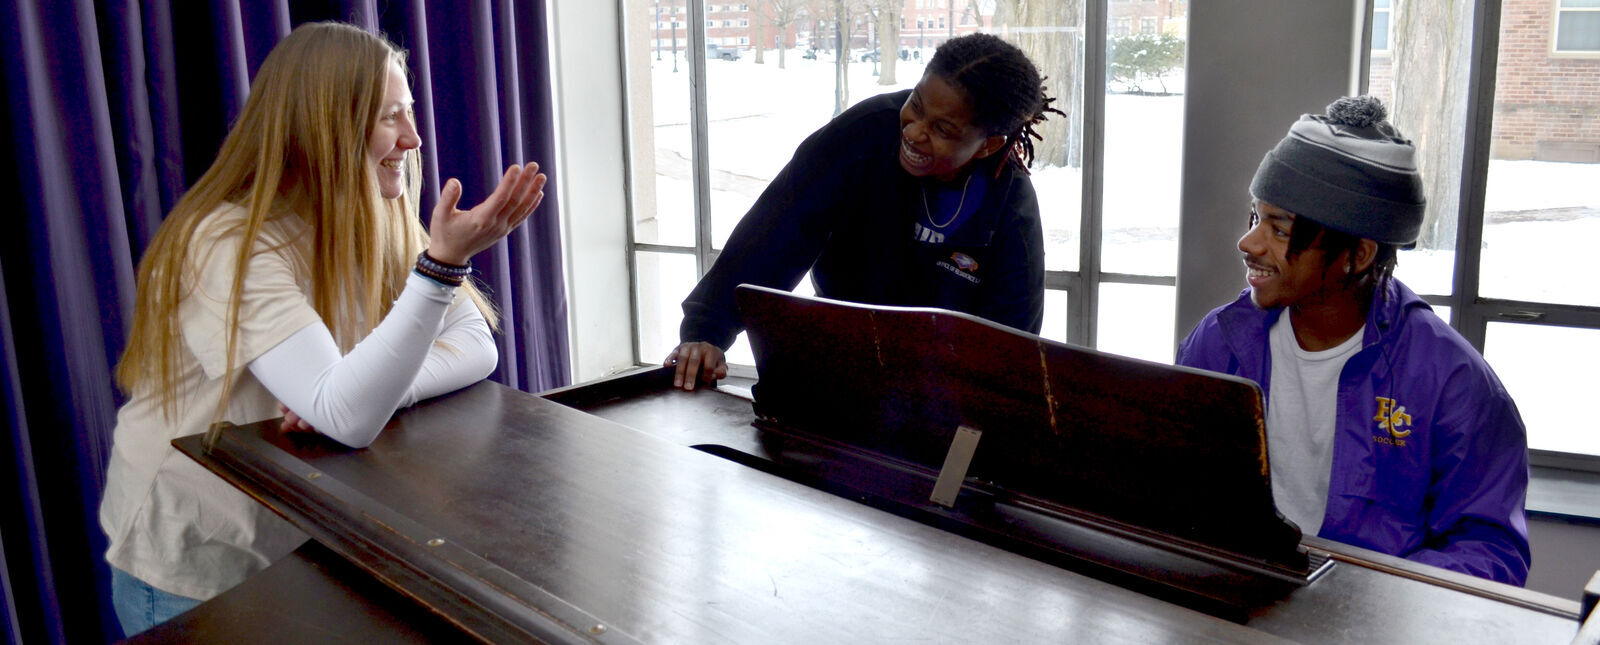 A female student and two male students share some laughs around a piano in the Towers residence hall.